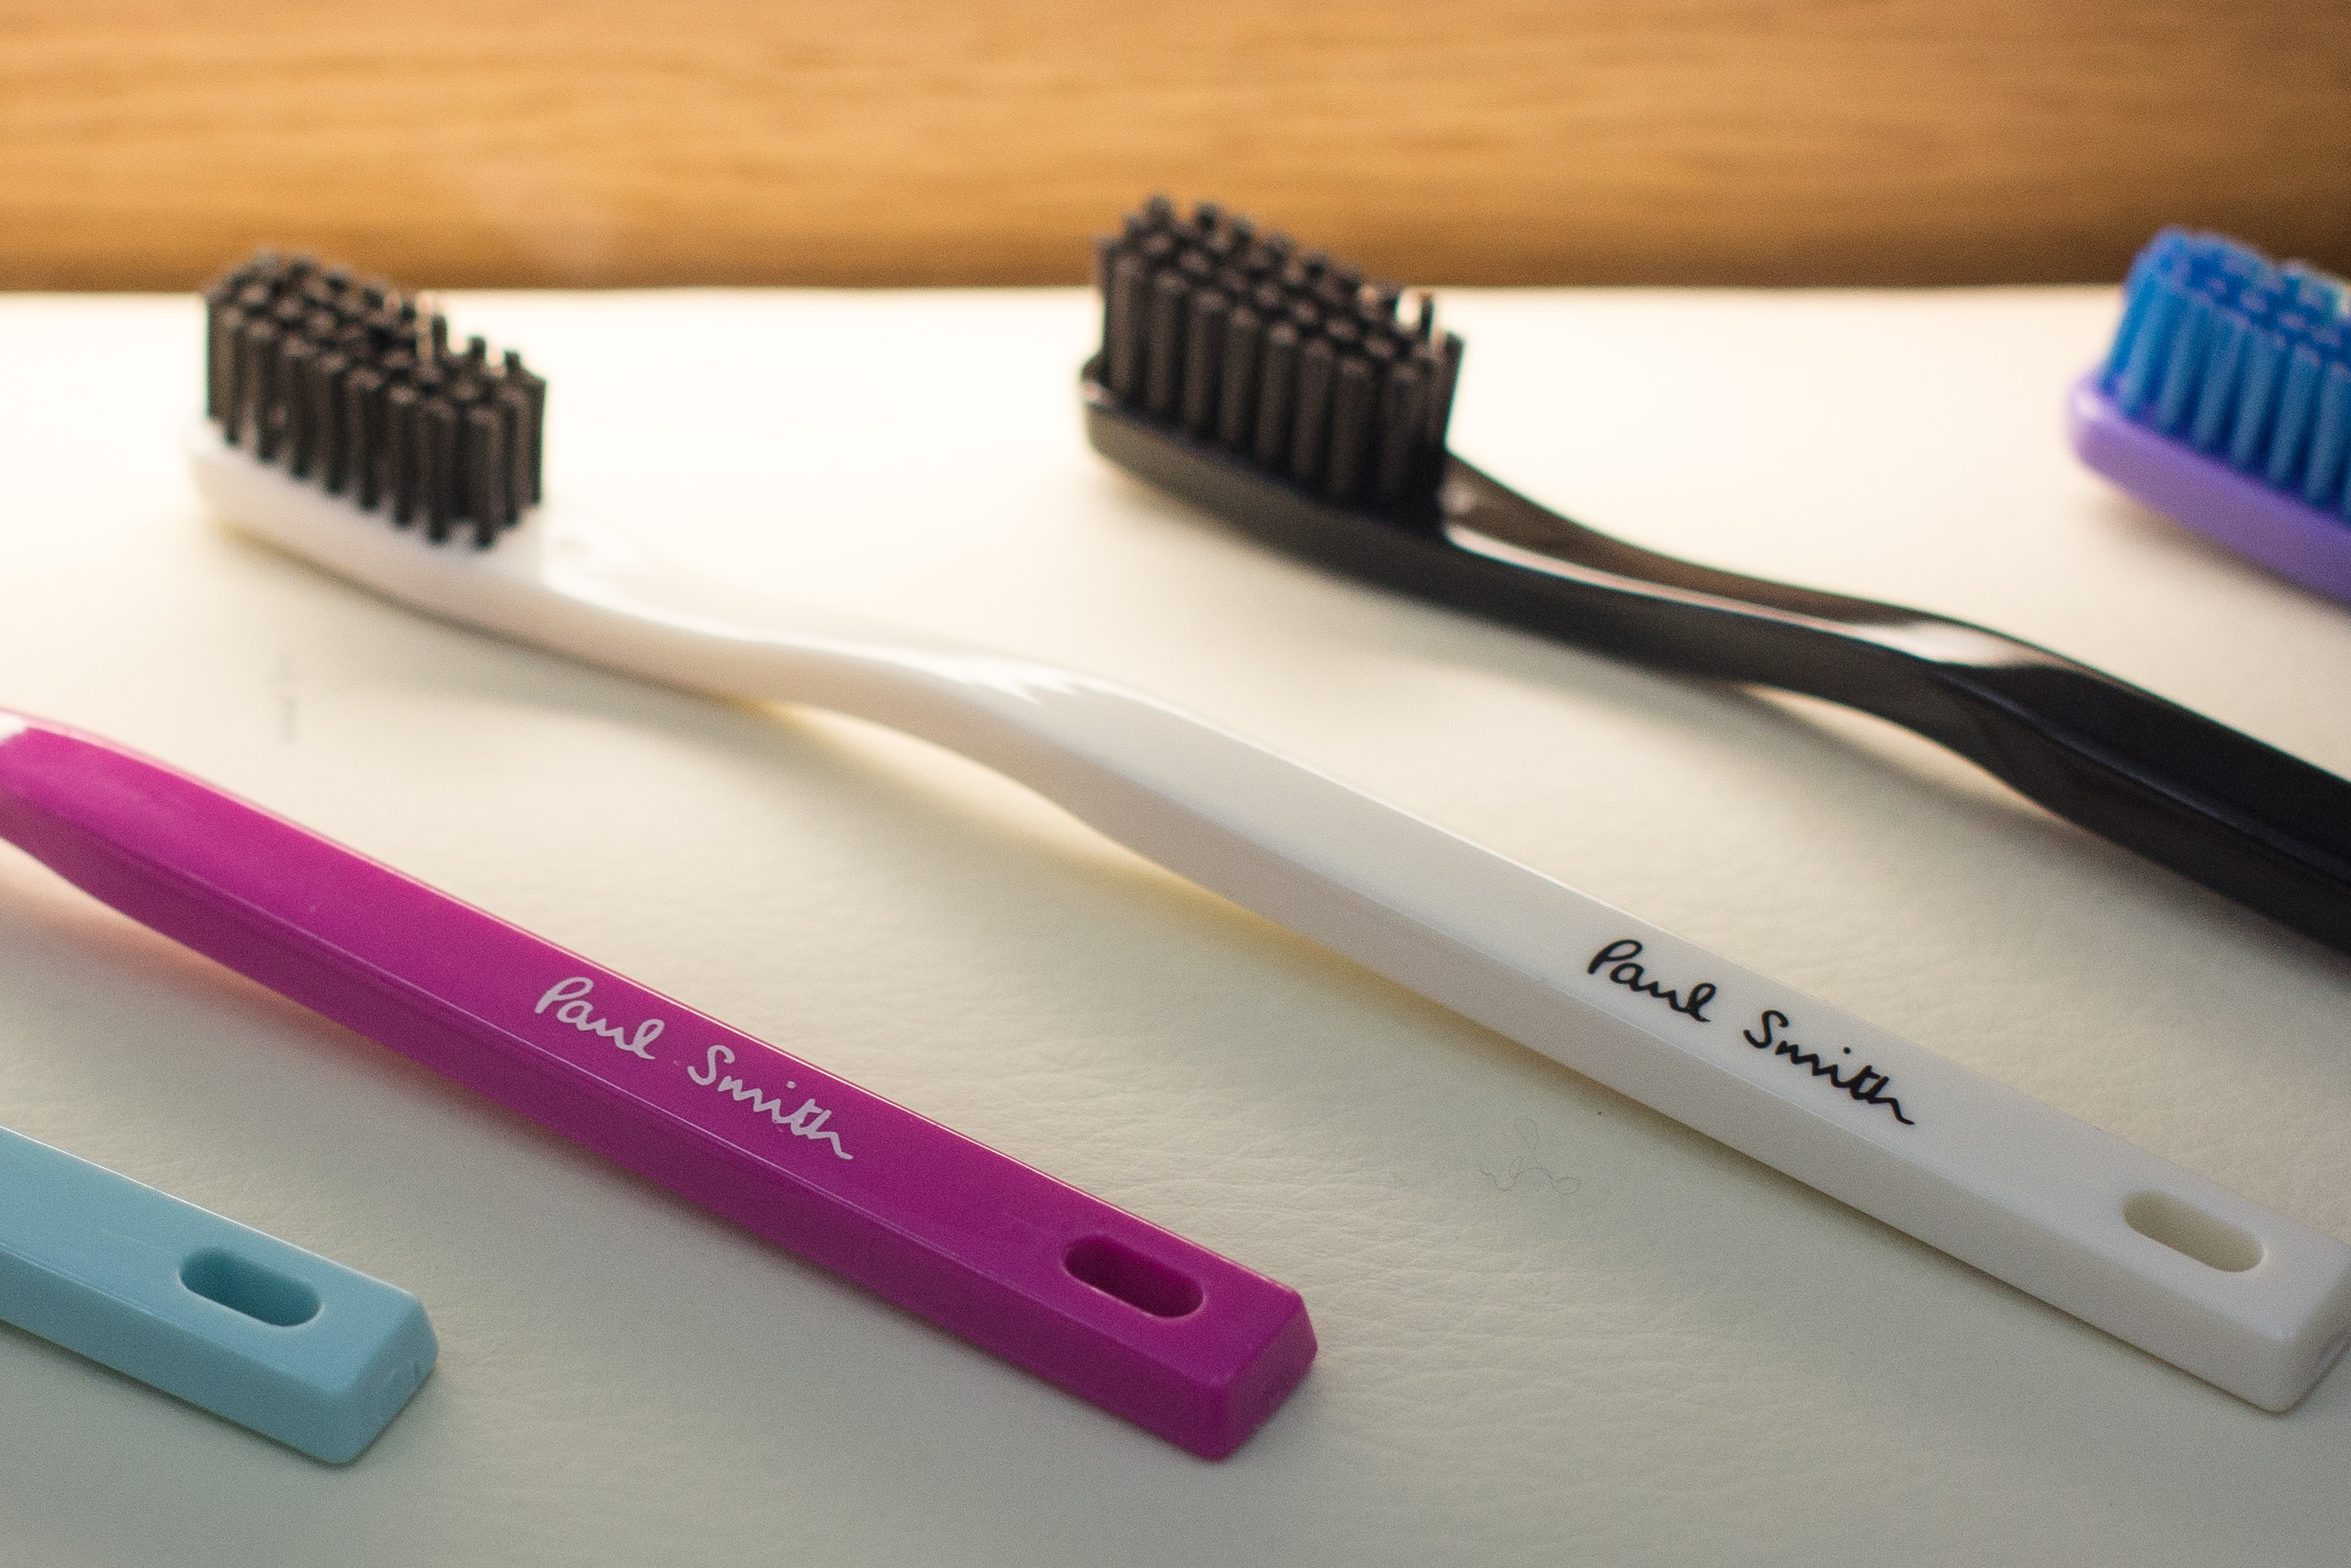 Paul Smith toothbrushes